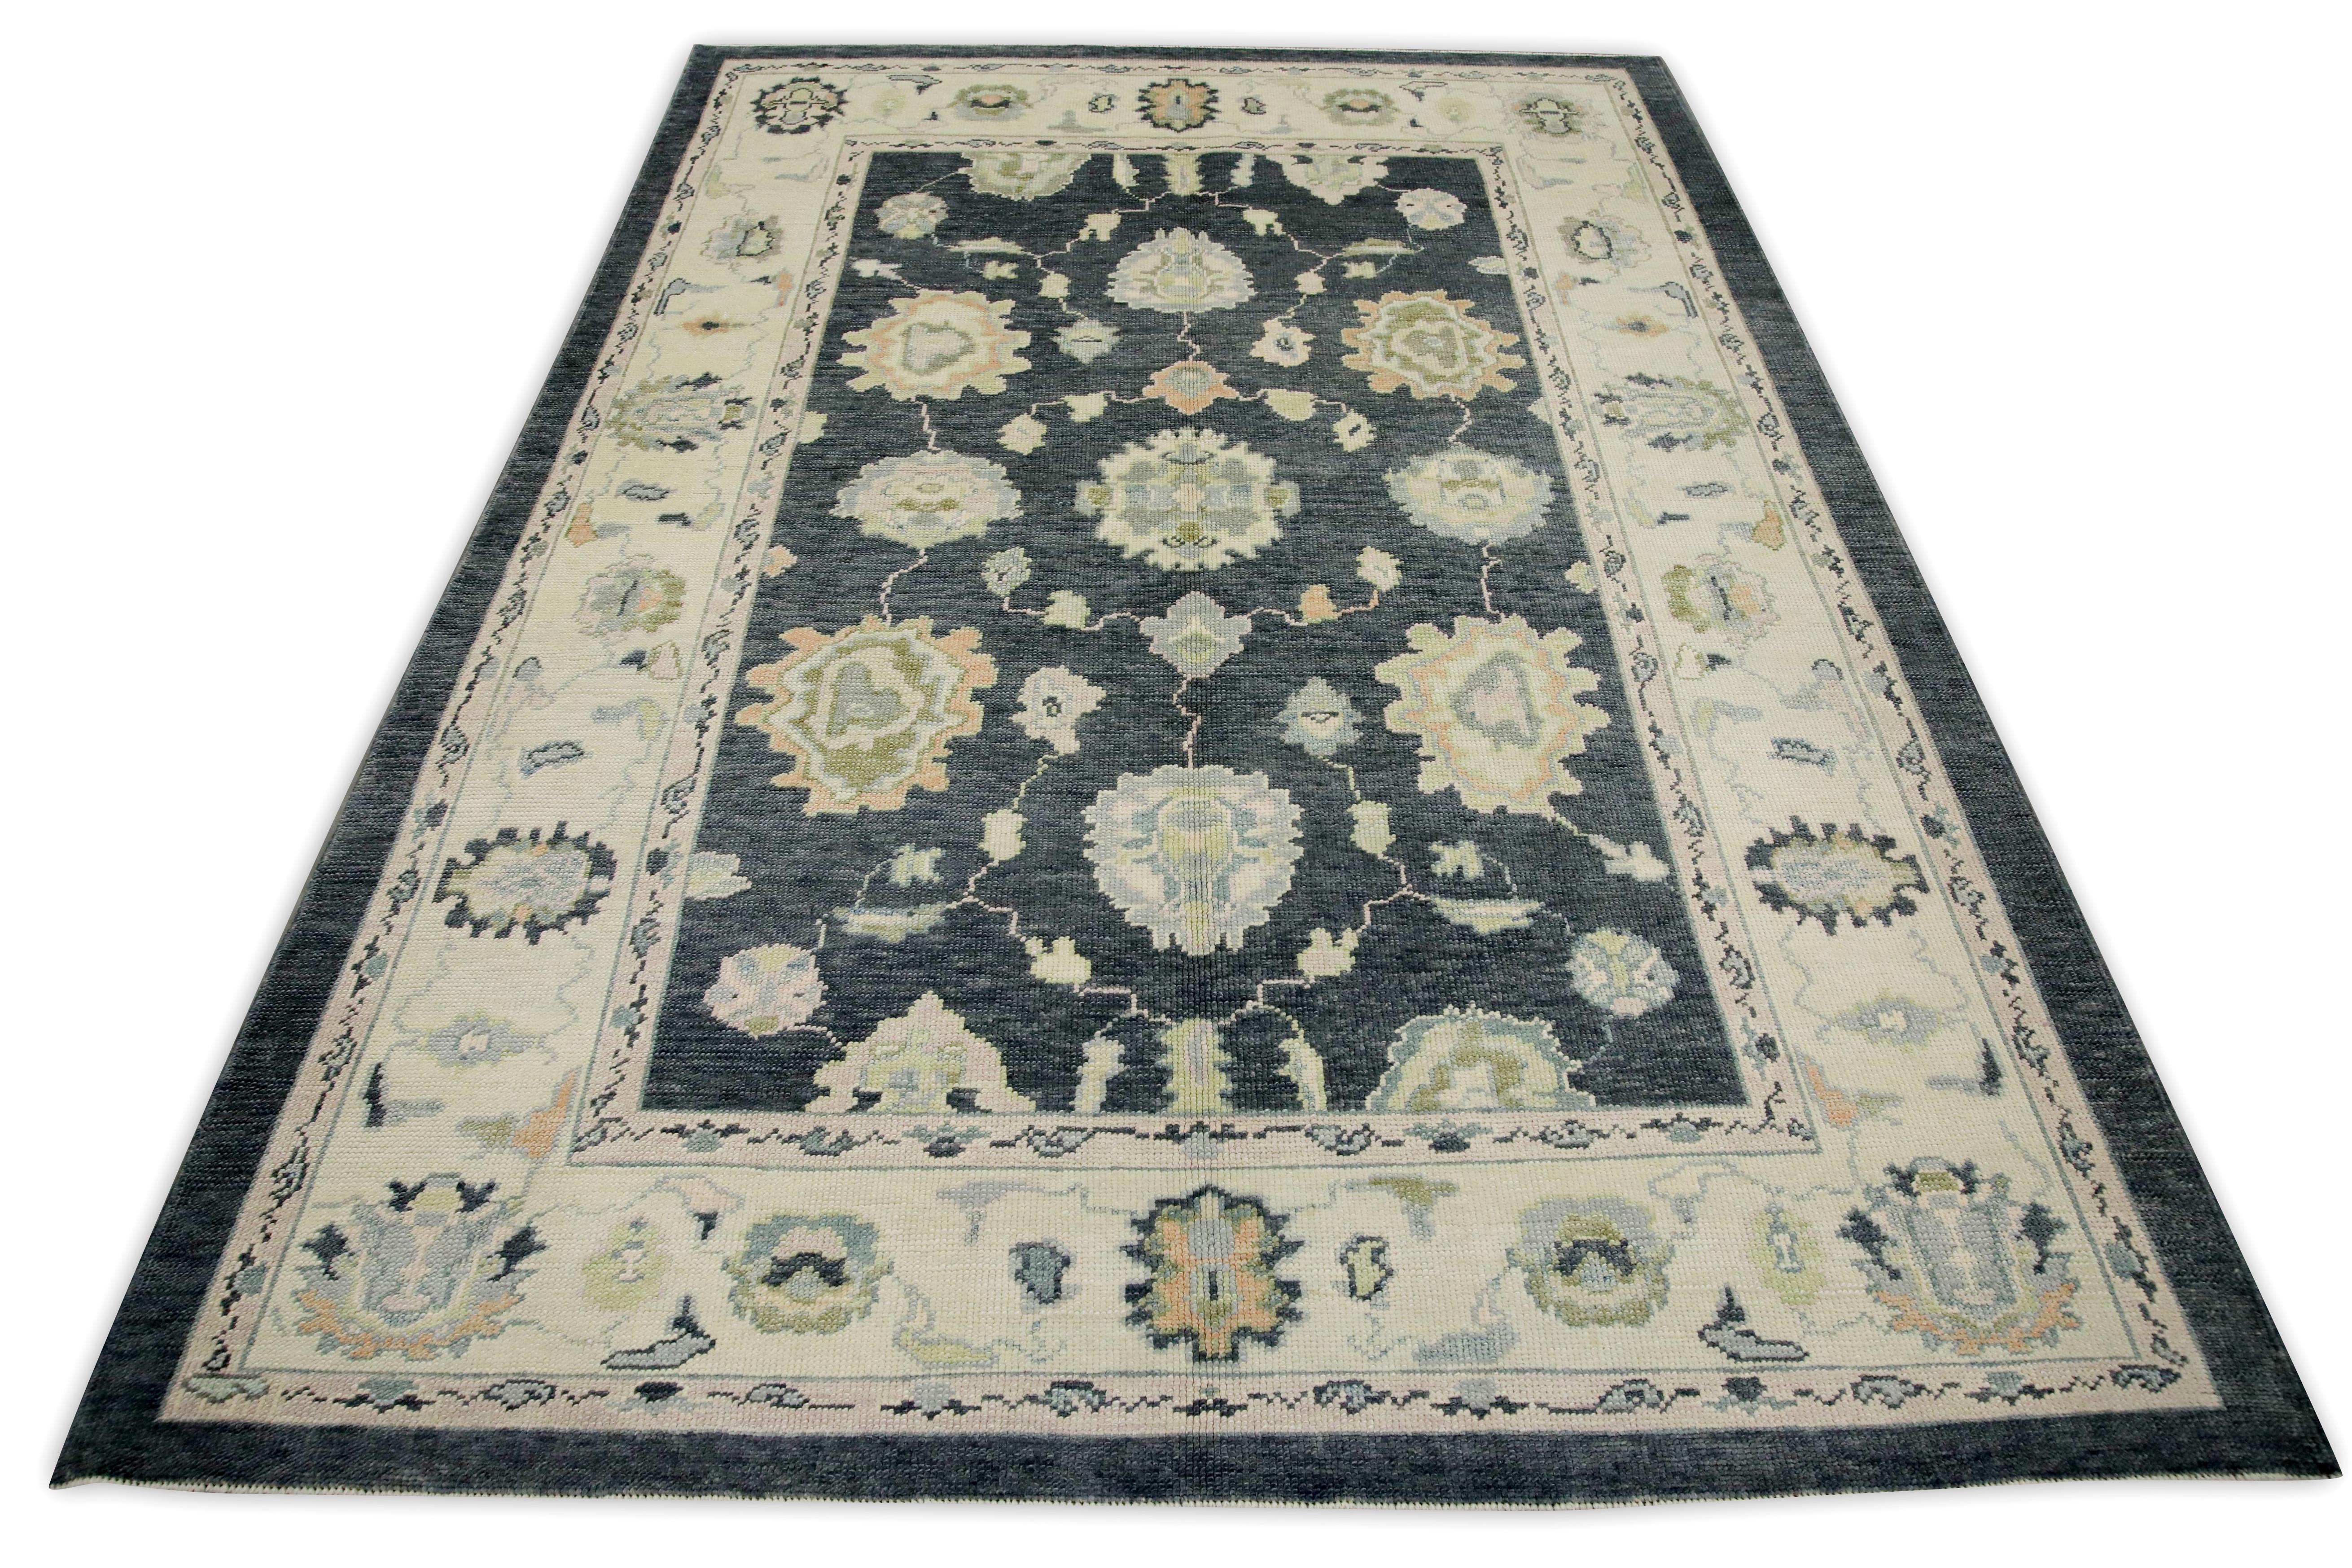 Contemporary Charcoal Floral Design Handwoven Wool Turkish Oushak Rug 6'3